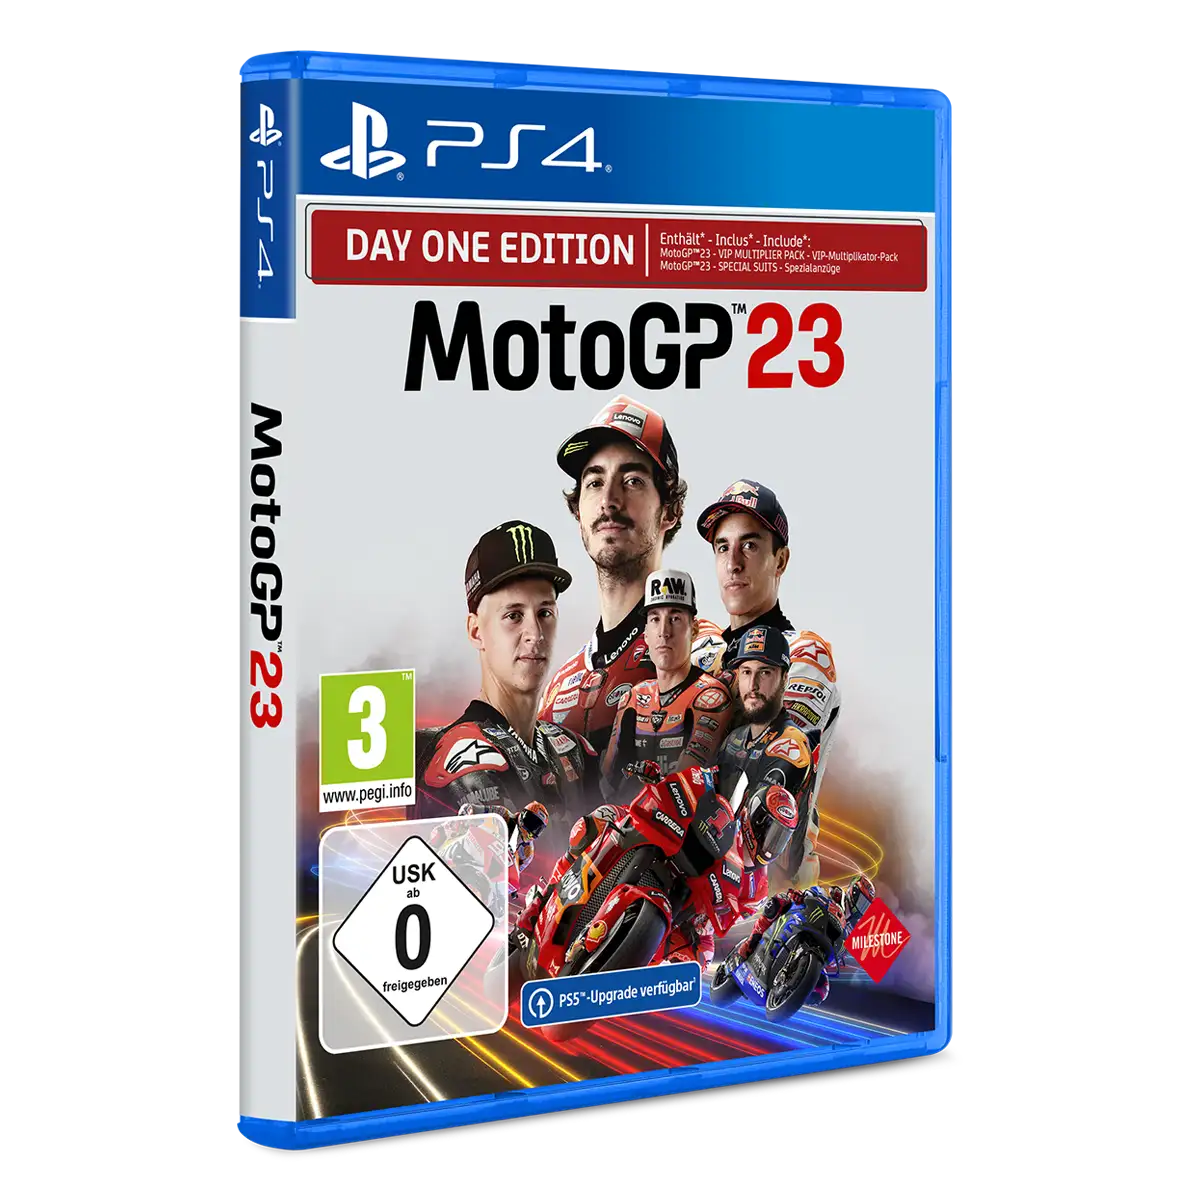 MotoGP 23 Day One Edition (PS4) Image 2